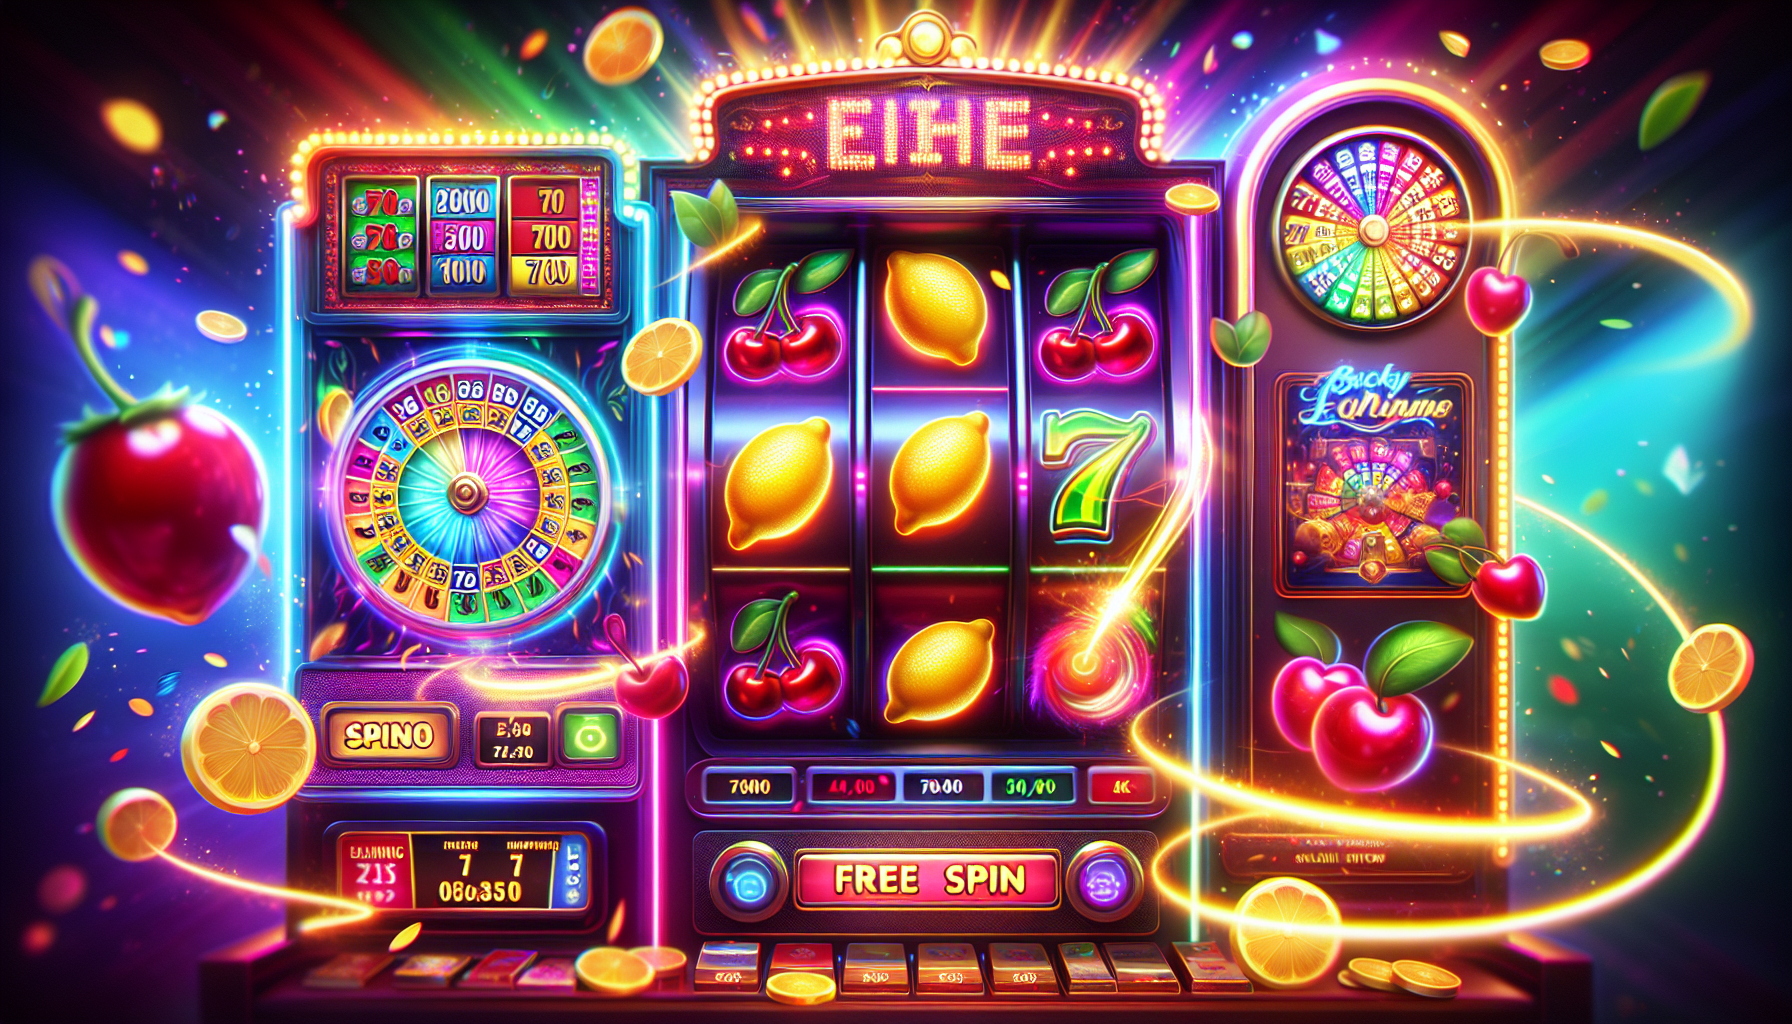 Online casino game with bonus rounds and free spins